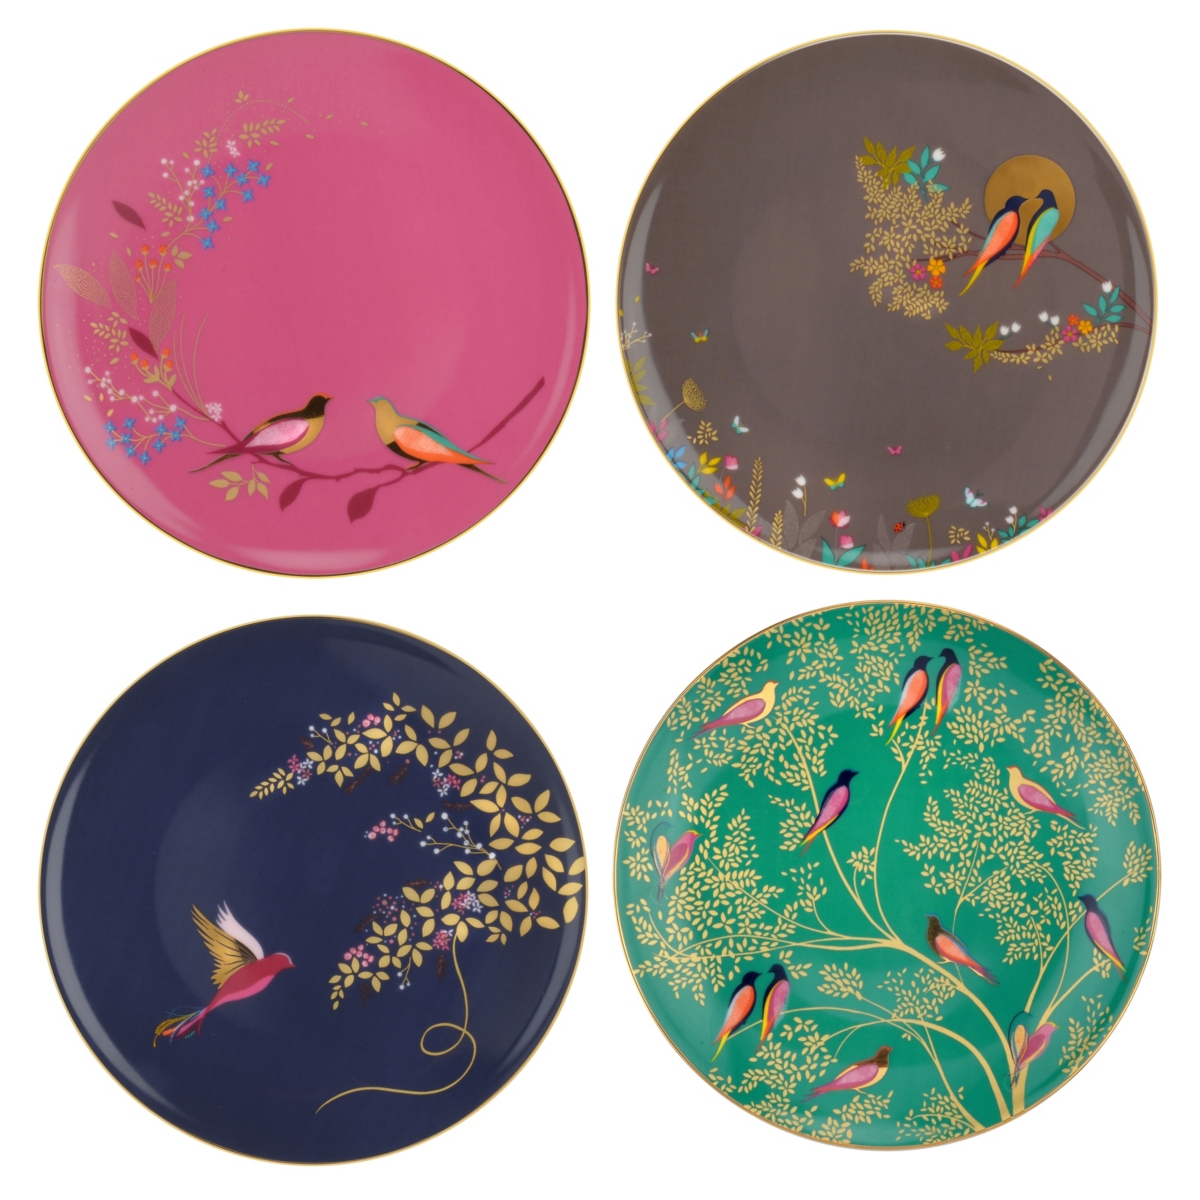 Sara Miller 8" Set of 4 Assorted Plates - Assorted Colors